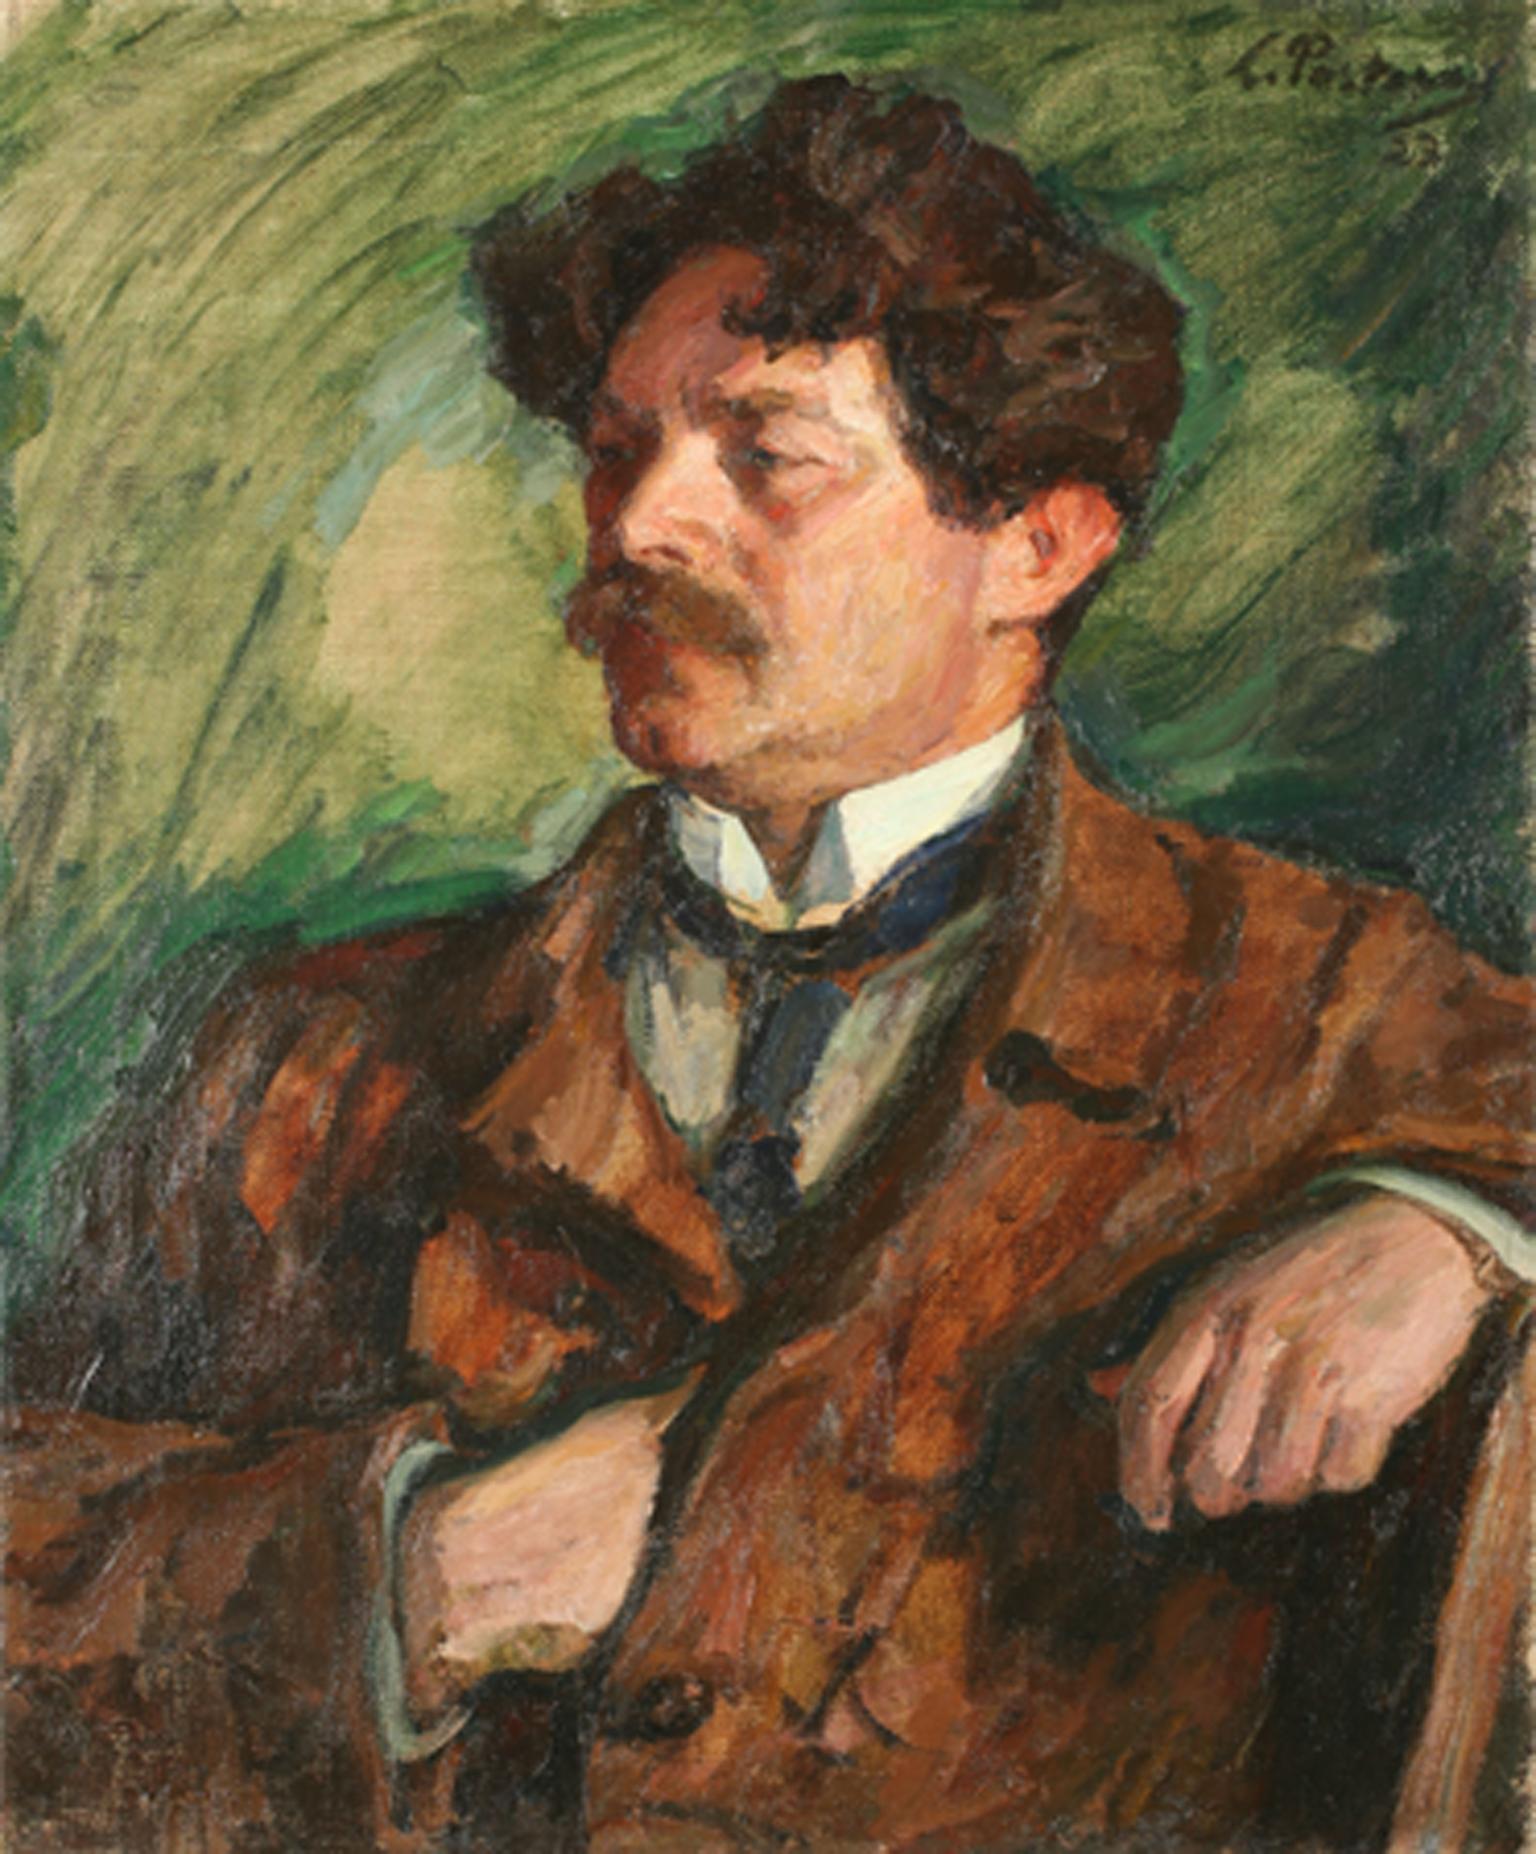 Portrait painting of man wearing a suit and gazing toward the right with one hand tucked under his coat lapel.